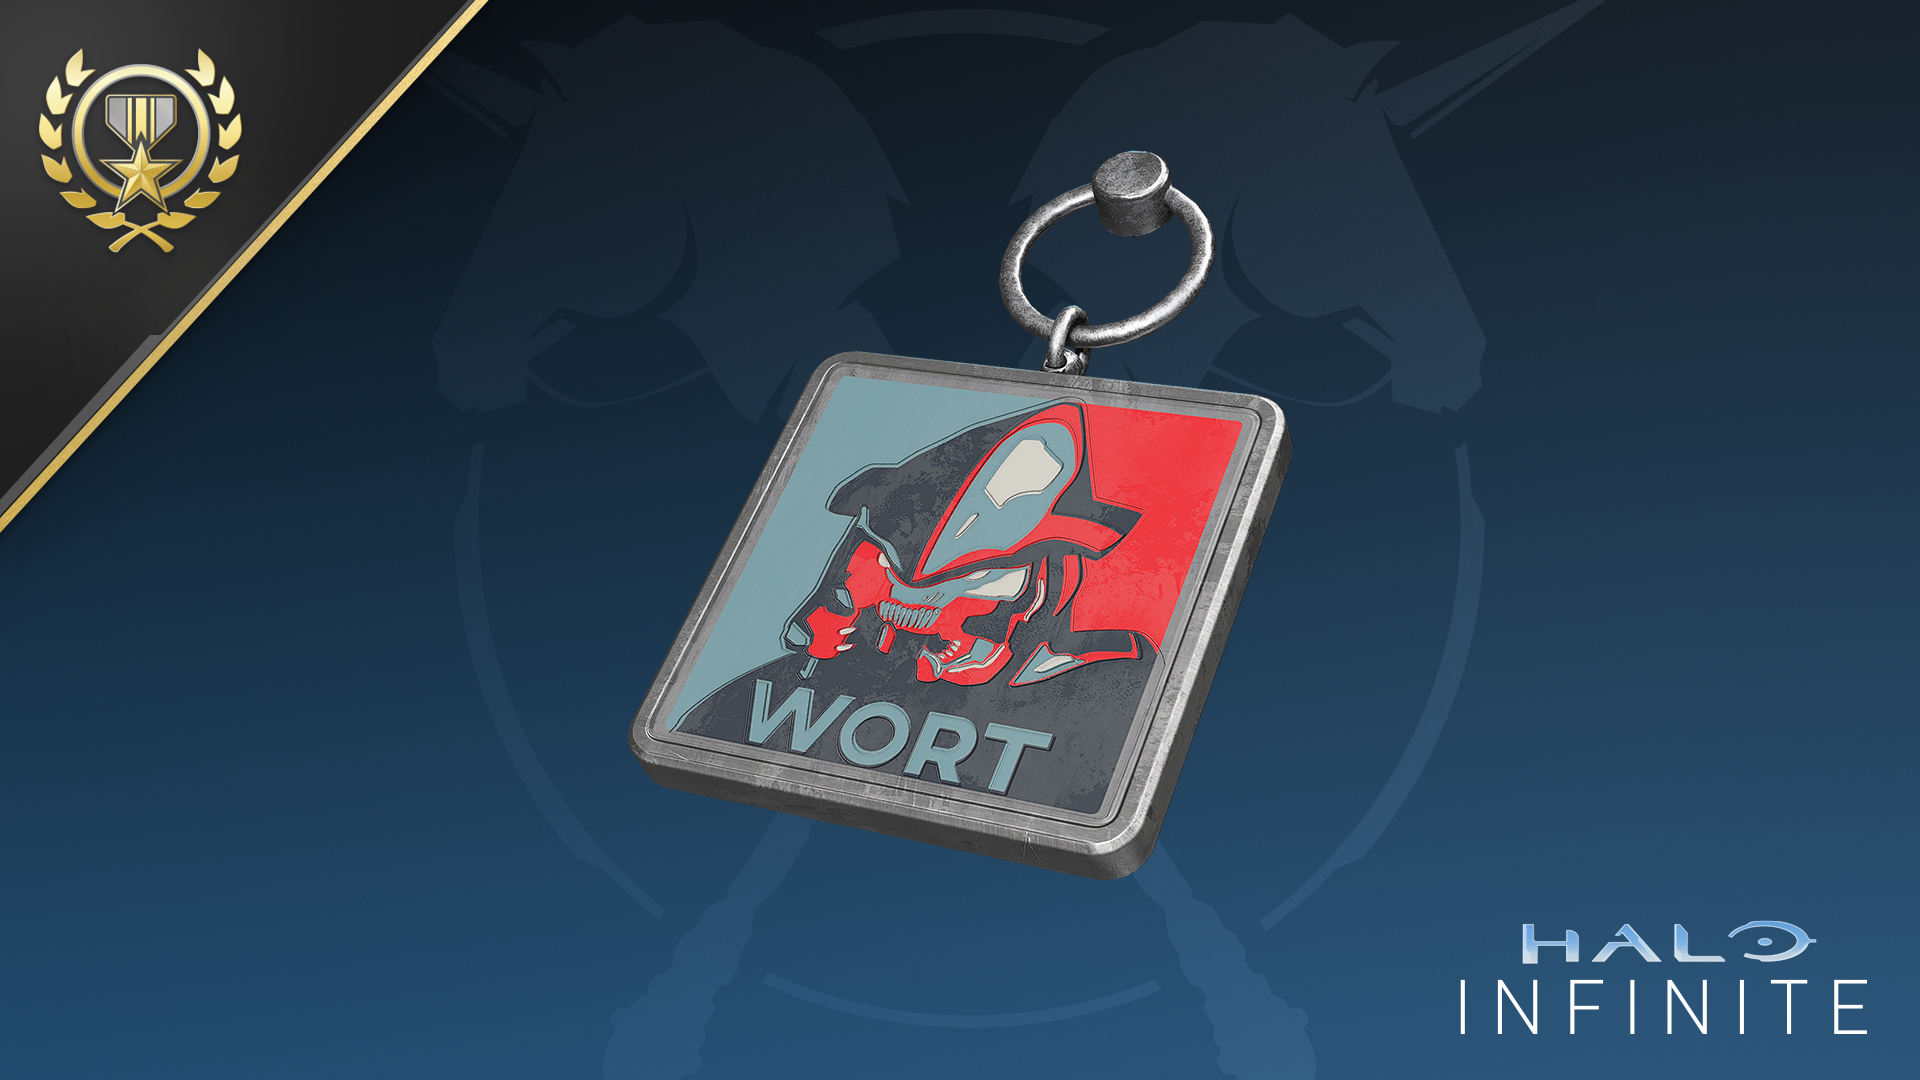 The WORT weapon charm.